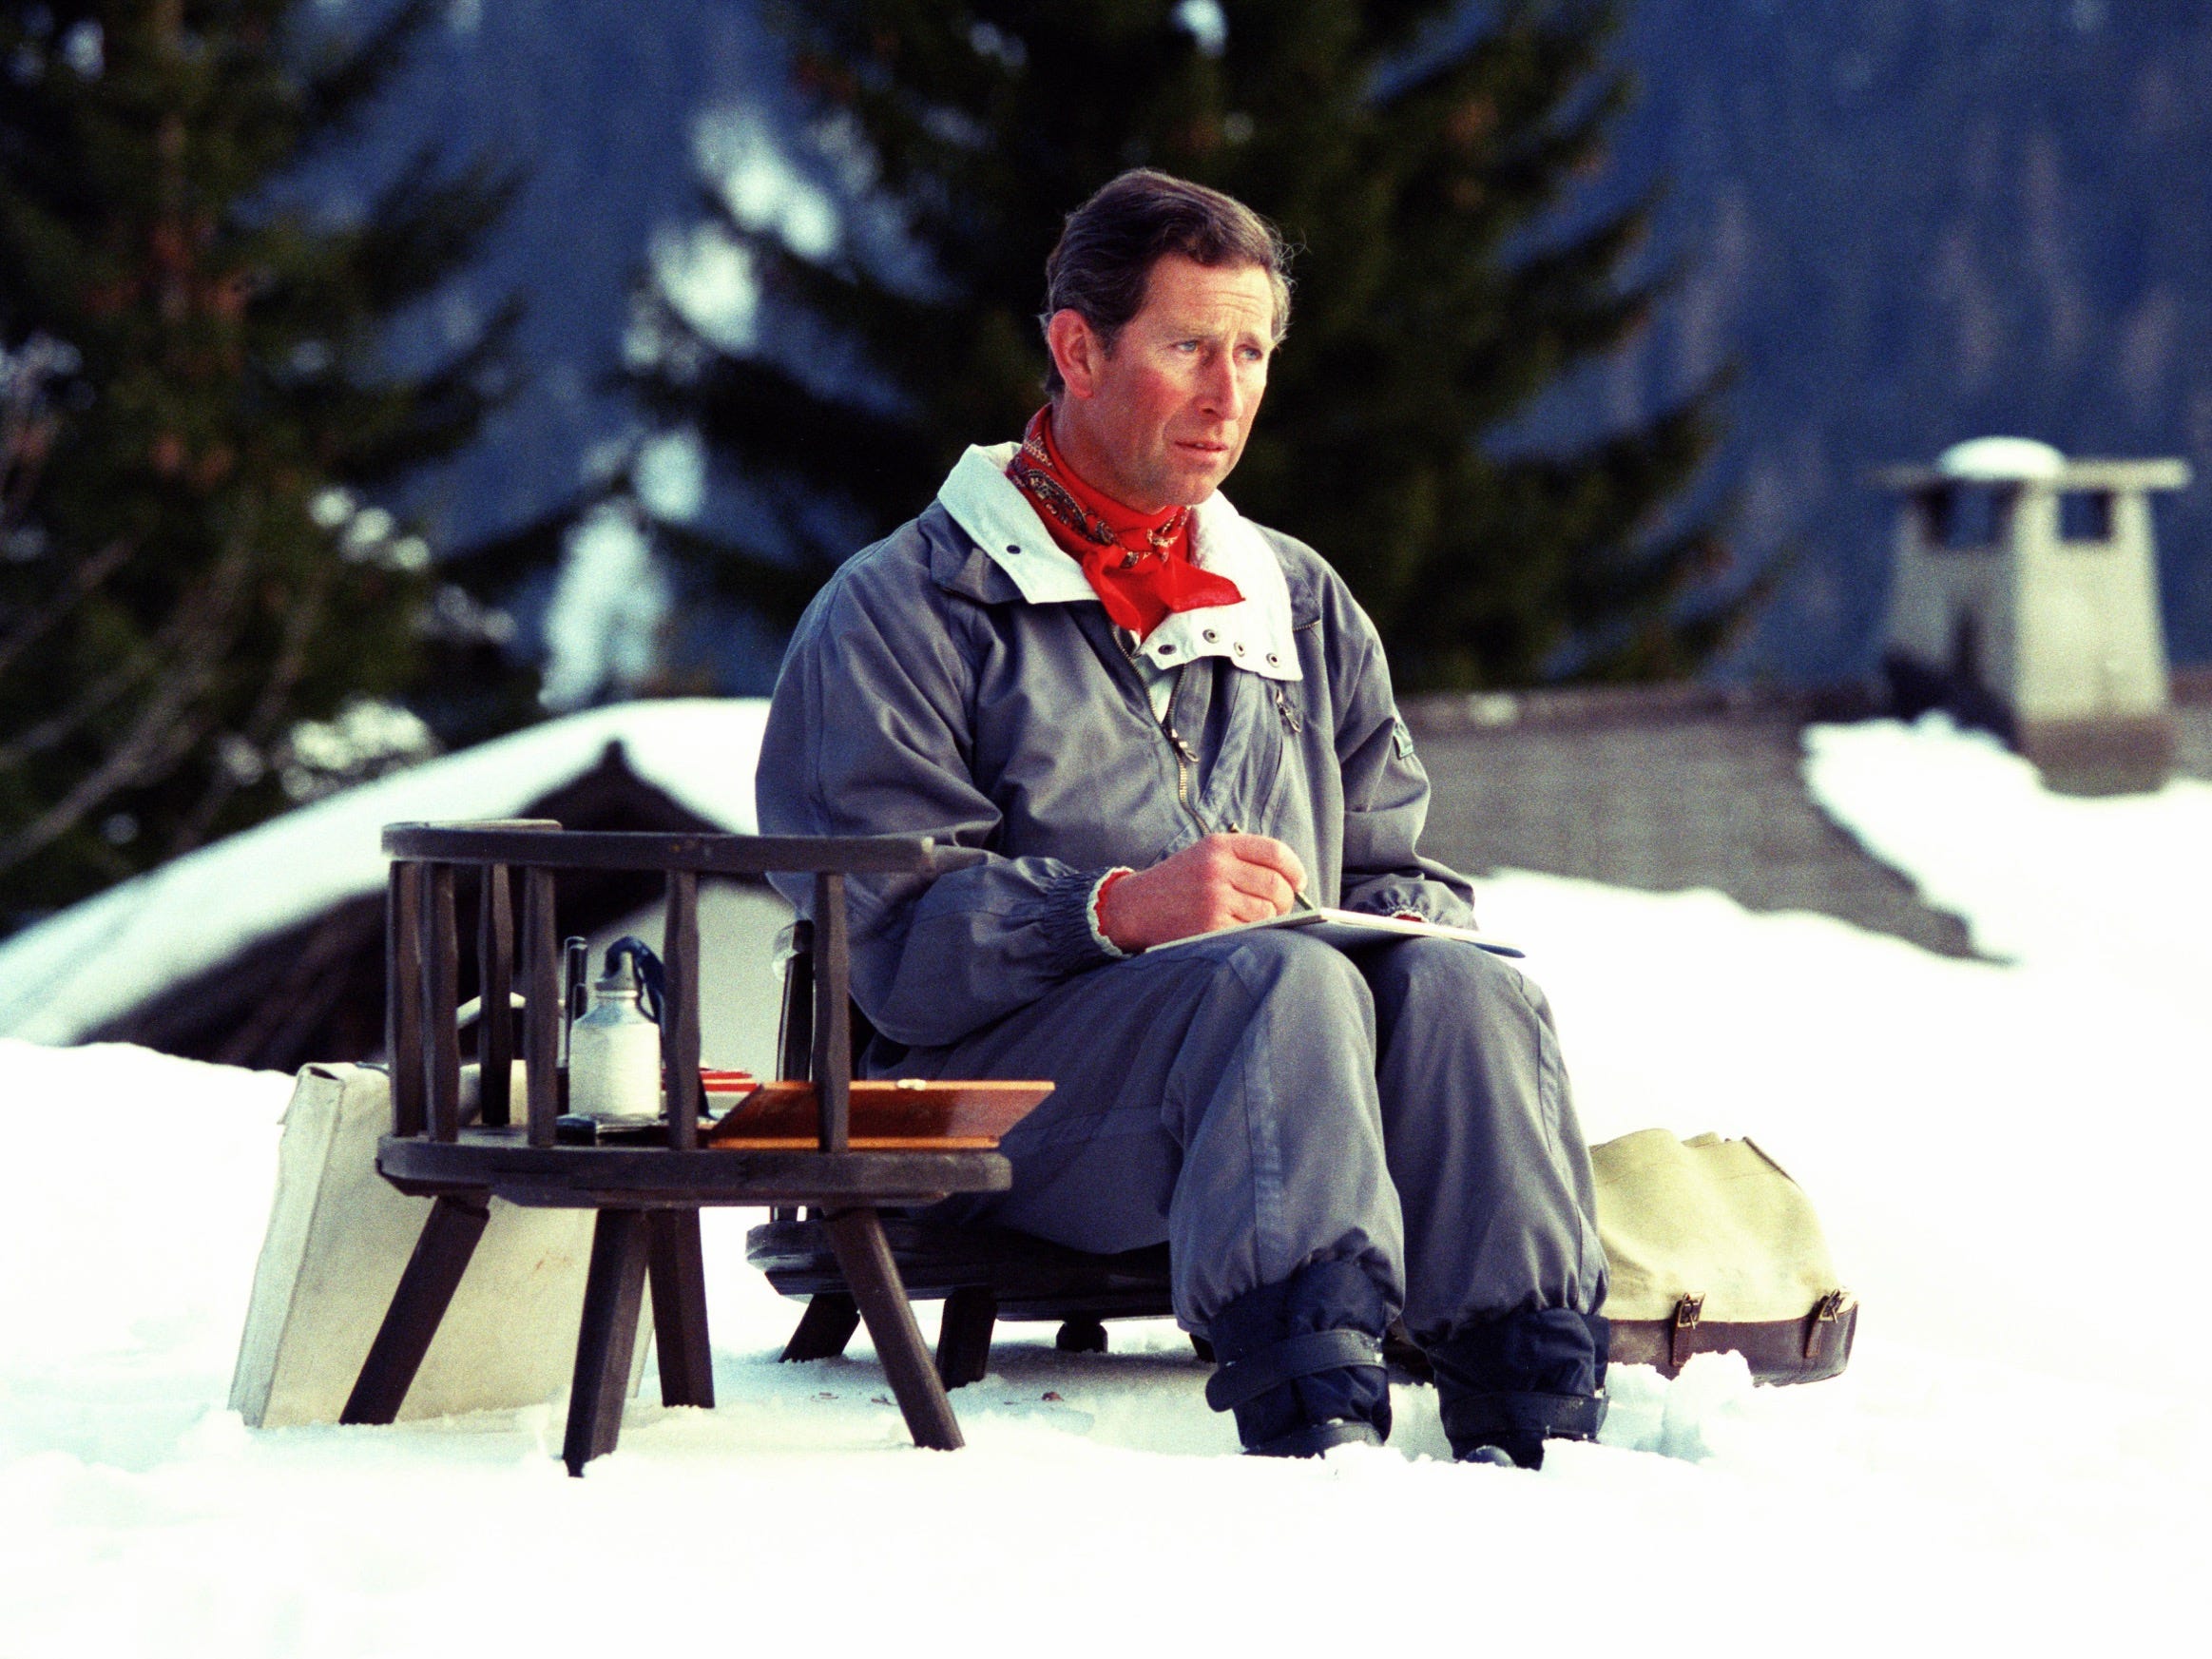 Prince Charles watercoloring in Klosters, Switzerland